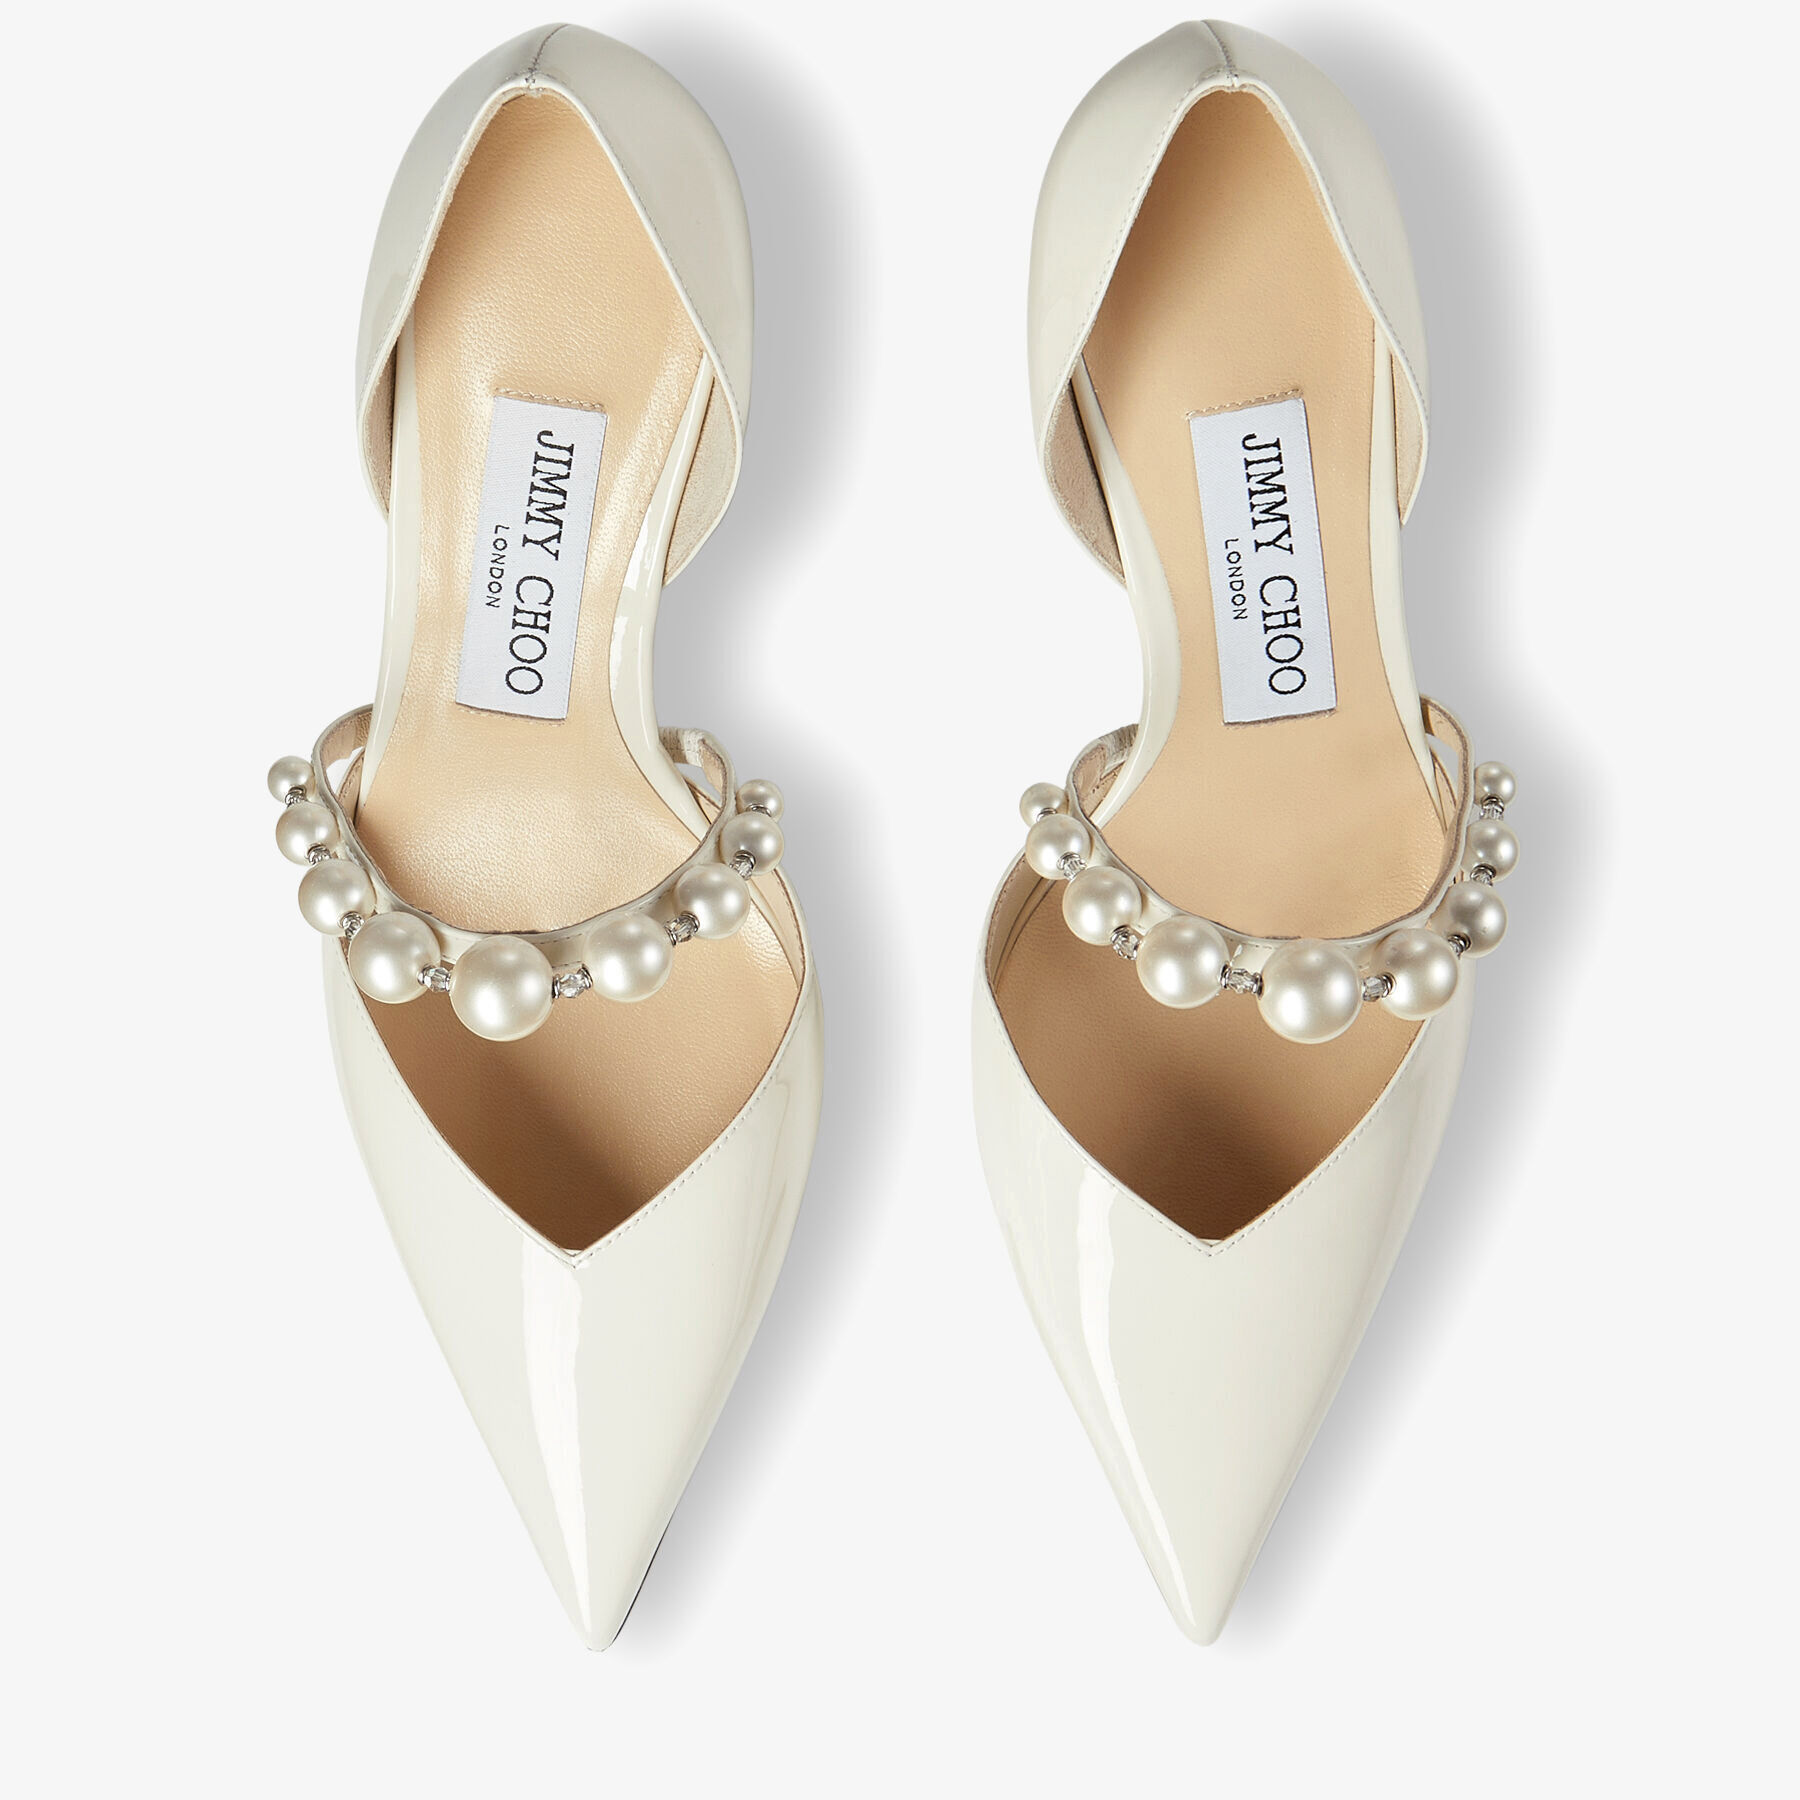 40 of our Favorite Wedding Shoes for 2022 - Bridal Shoes, Wedding Shoes